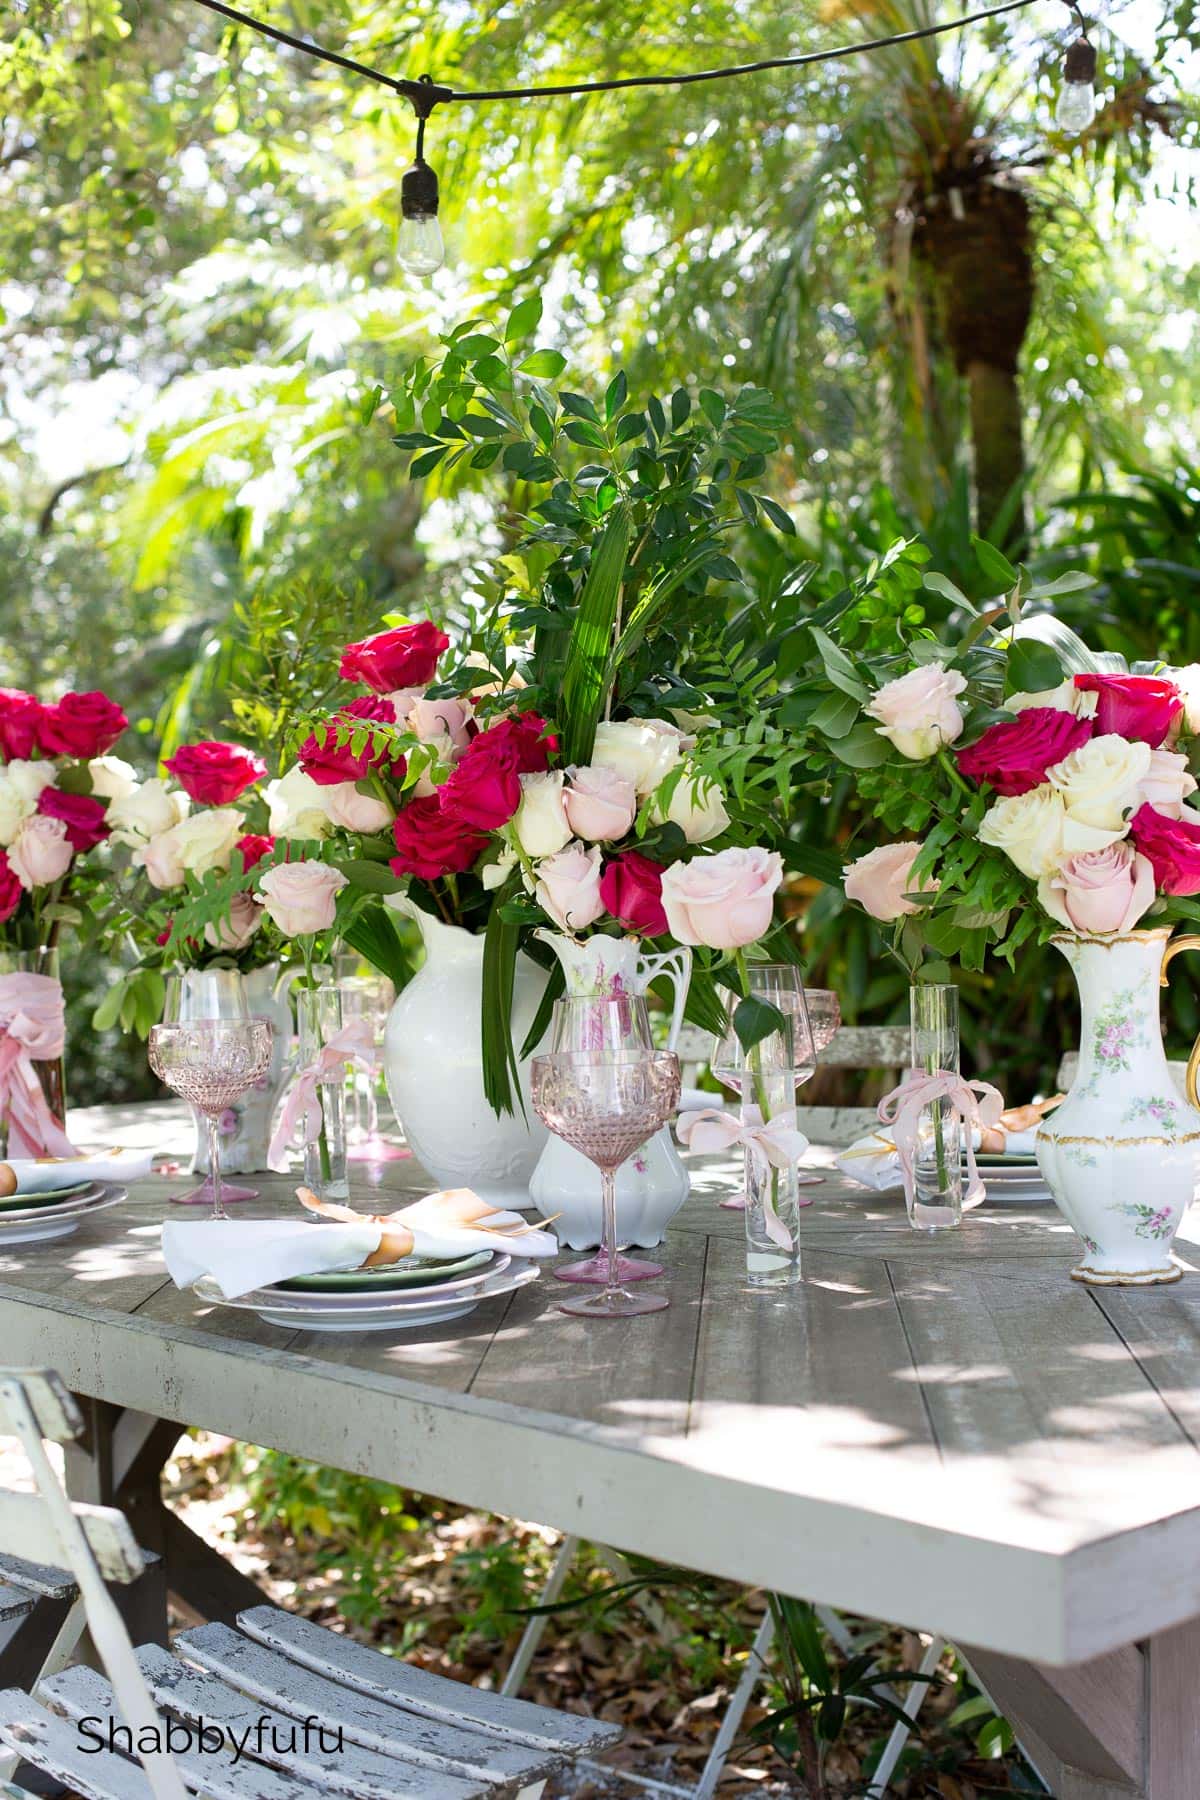 Arrange Flowers Like A Pro With These 10 Best Tips